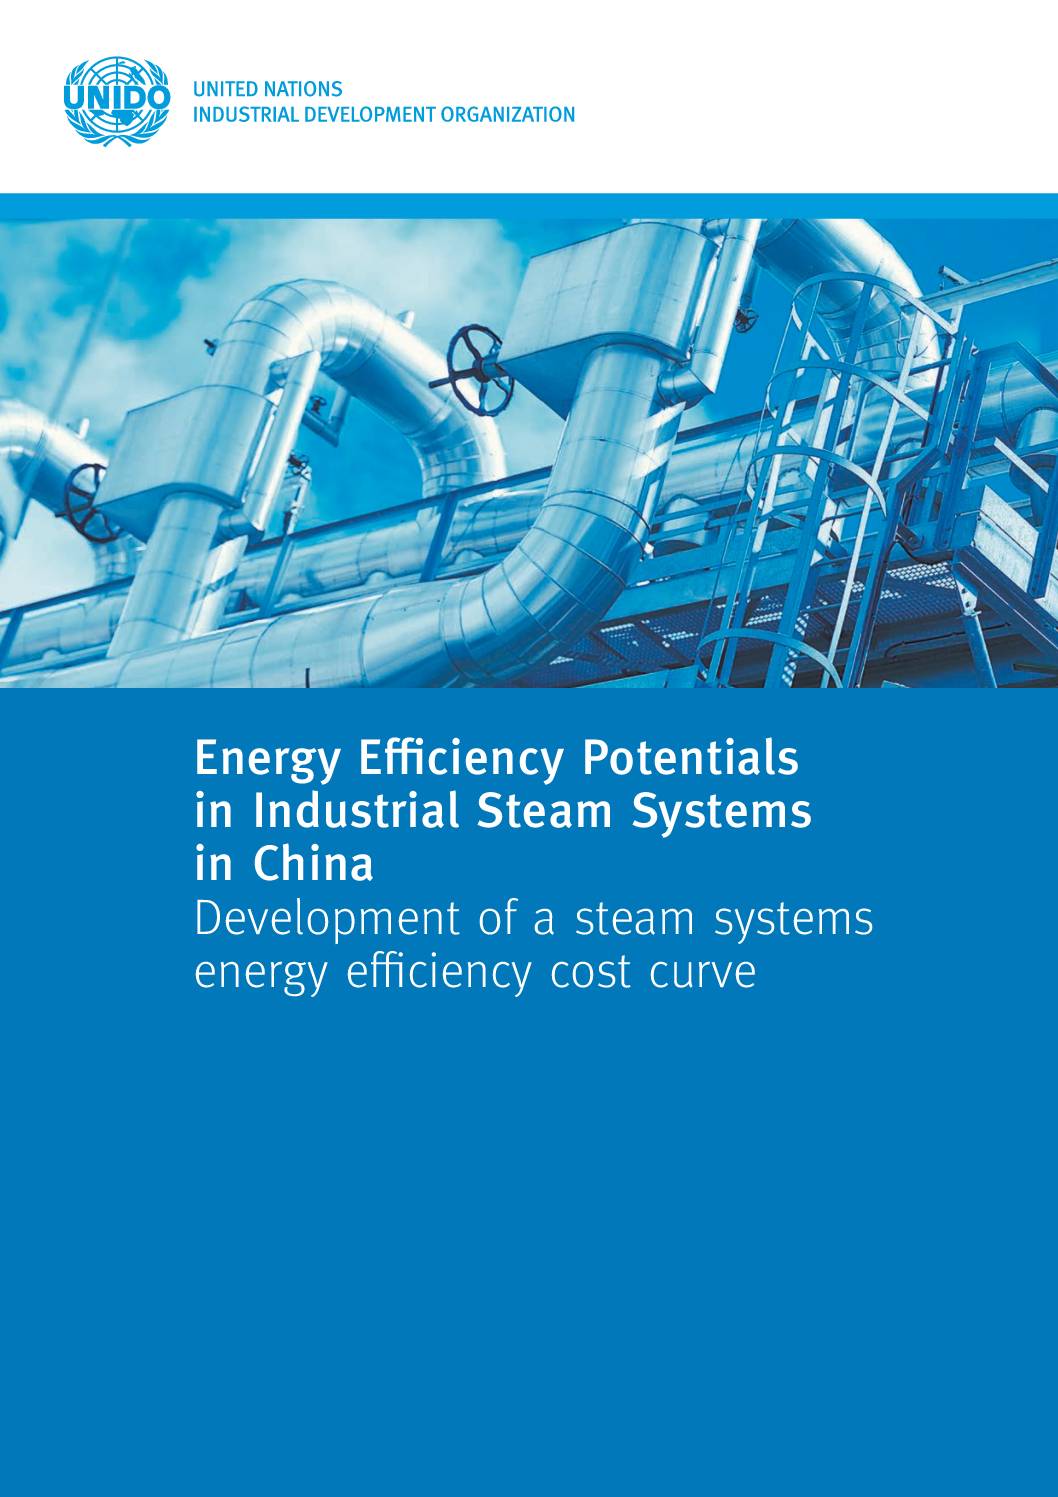 Energy Efficiency Potentials in Industrial Steam Systems in China: Development of a steam systems energy efficiency cost curve